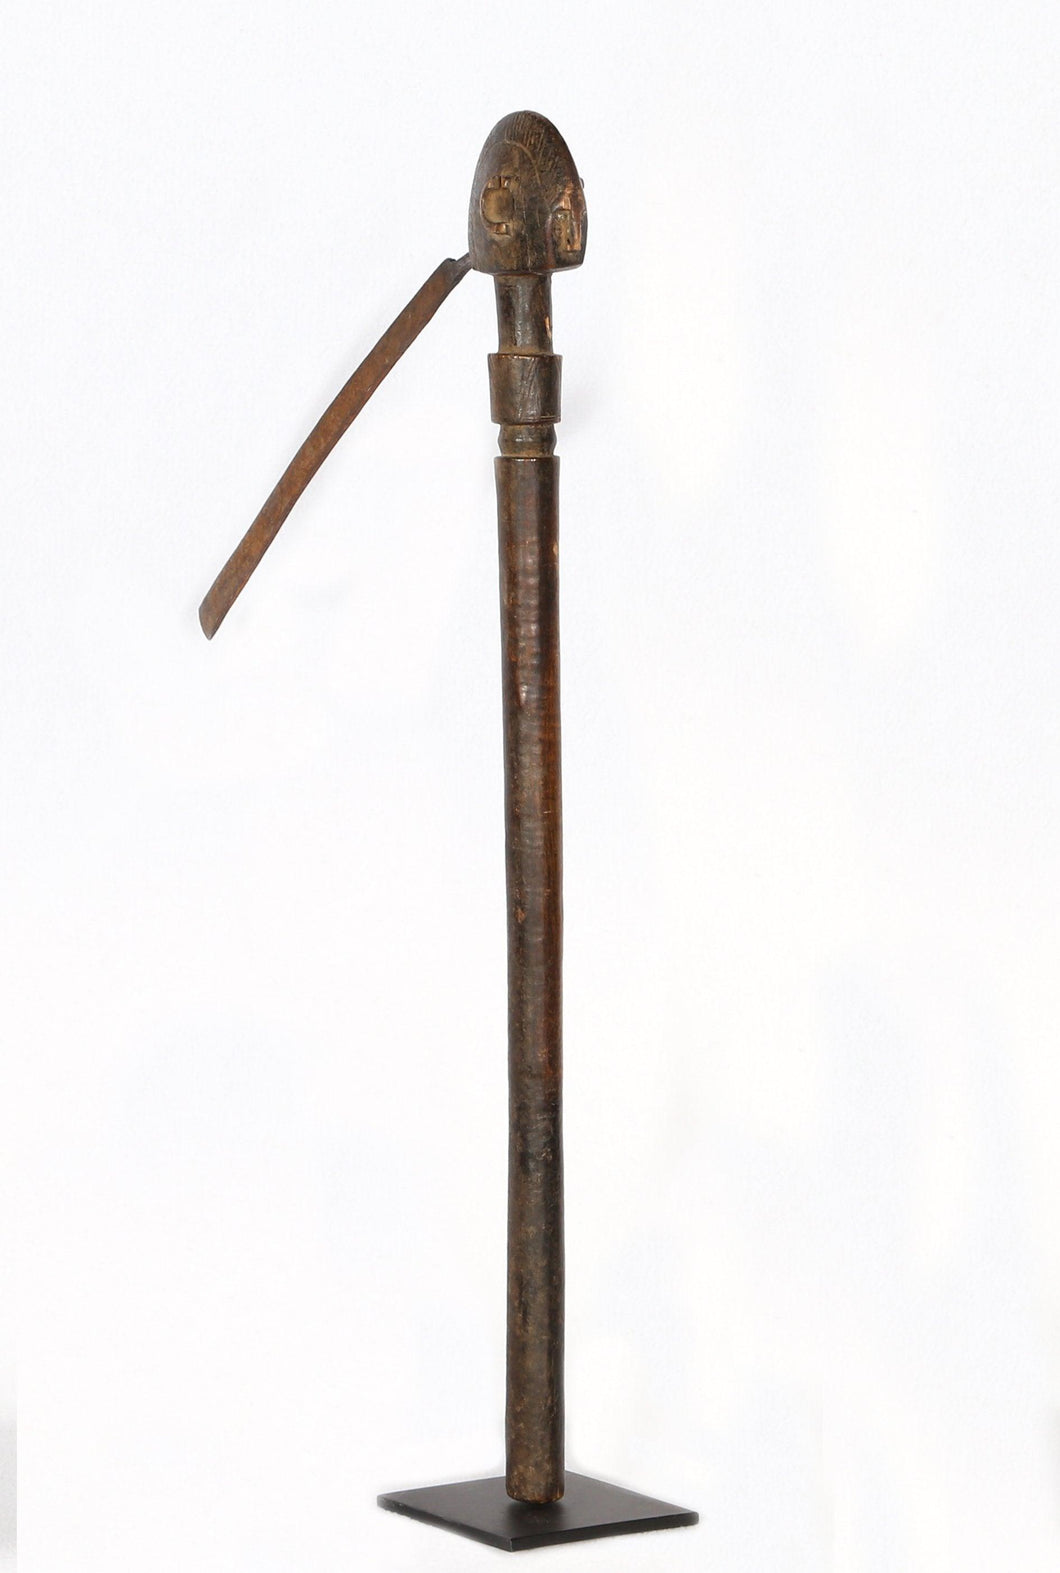 Scythe Tool with Face Wood | African or Oceanic Objects,{{product.type}}